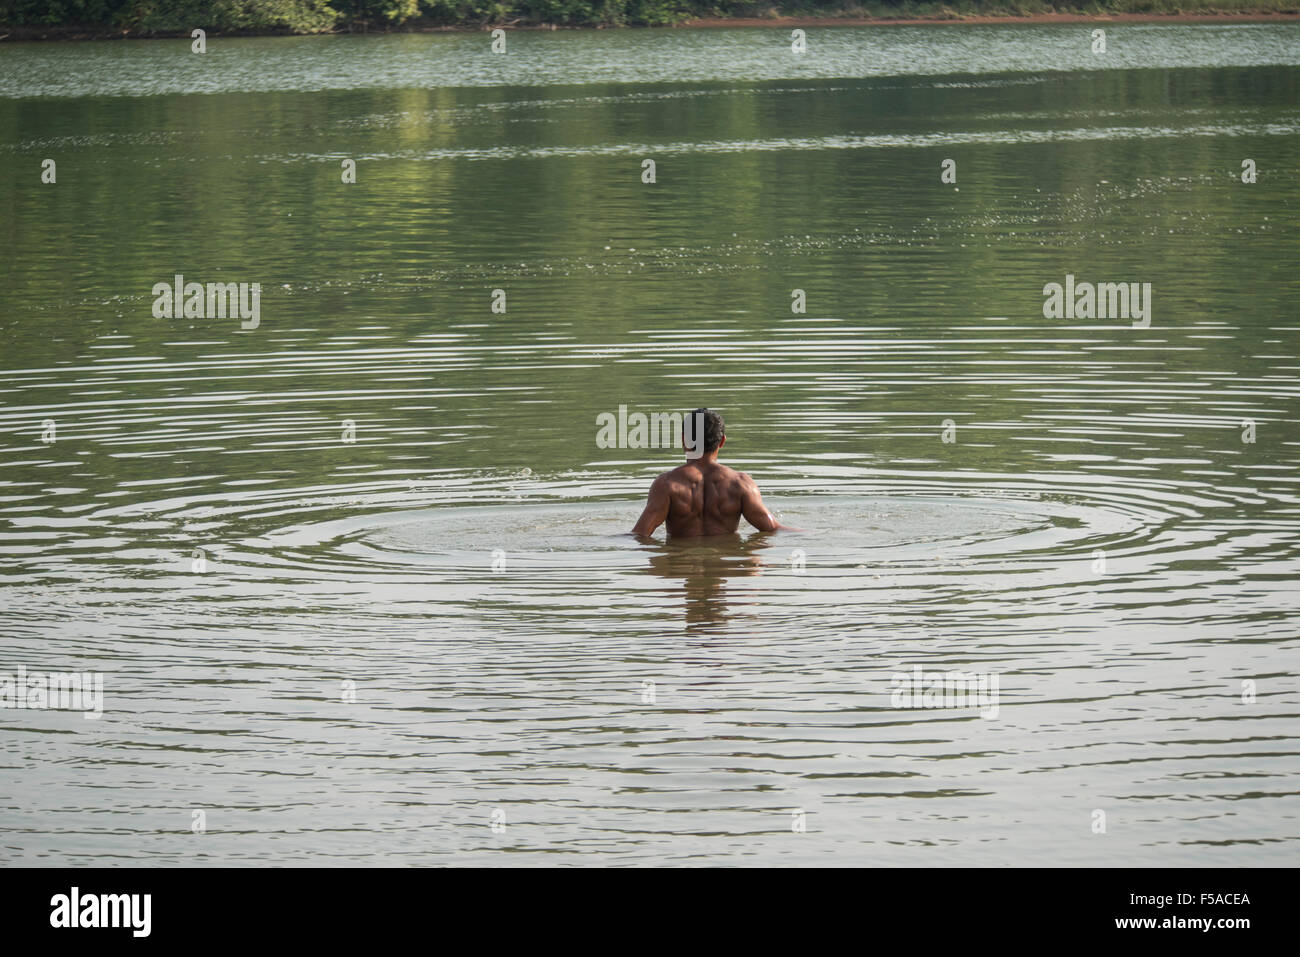 Palmas, Brazil. 30th October, 2015. A competitor takes a warm-up swim before the men's swimming race at the International Indigenous Games, in the city of Palmas, Tocantins State, Brazil. Credit:  Sue Cunningham Photographic/Alamy Live News Stock Photo